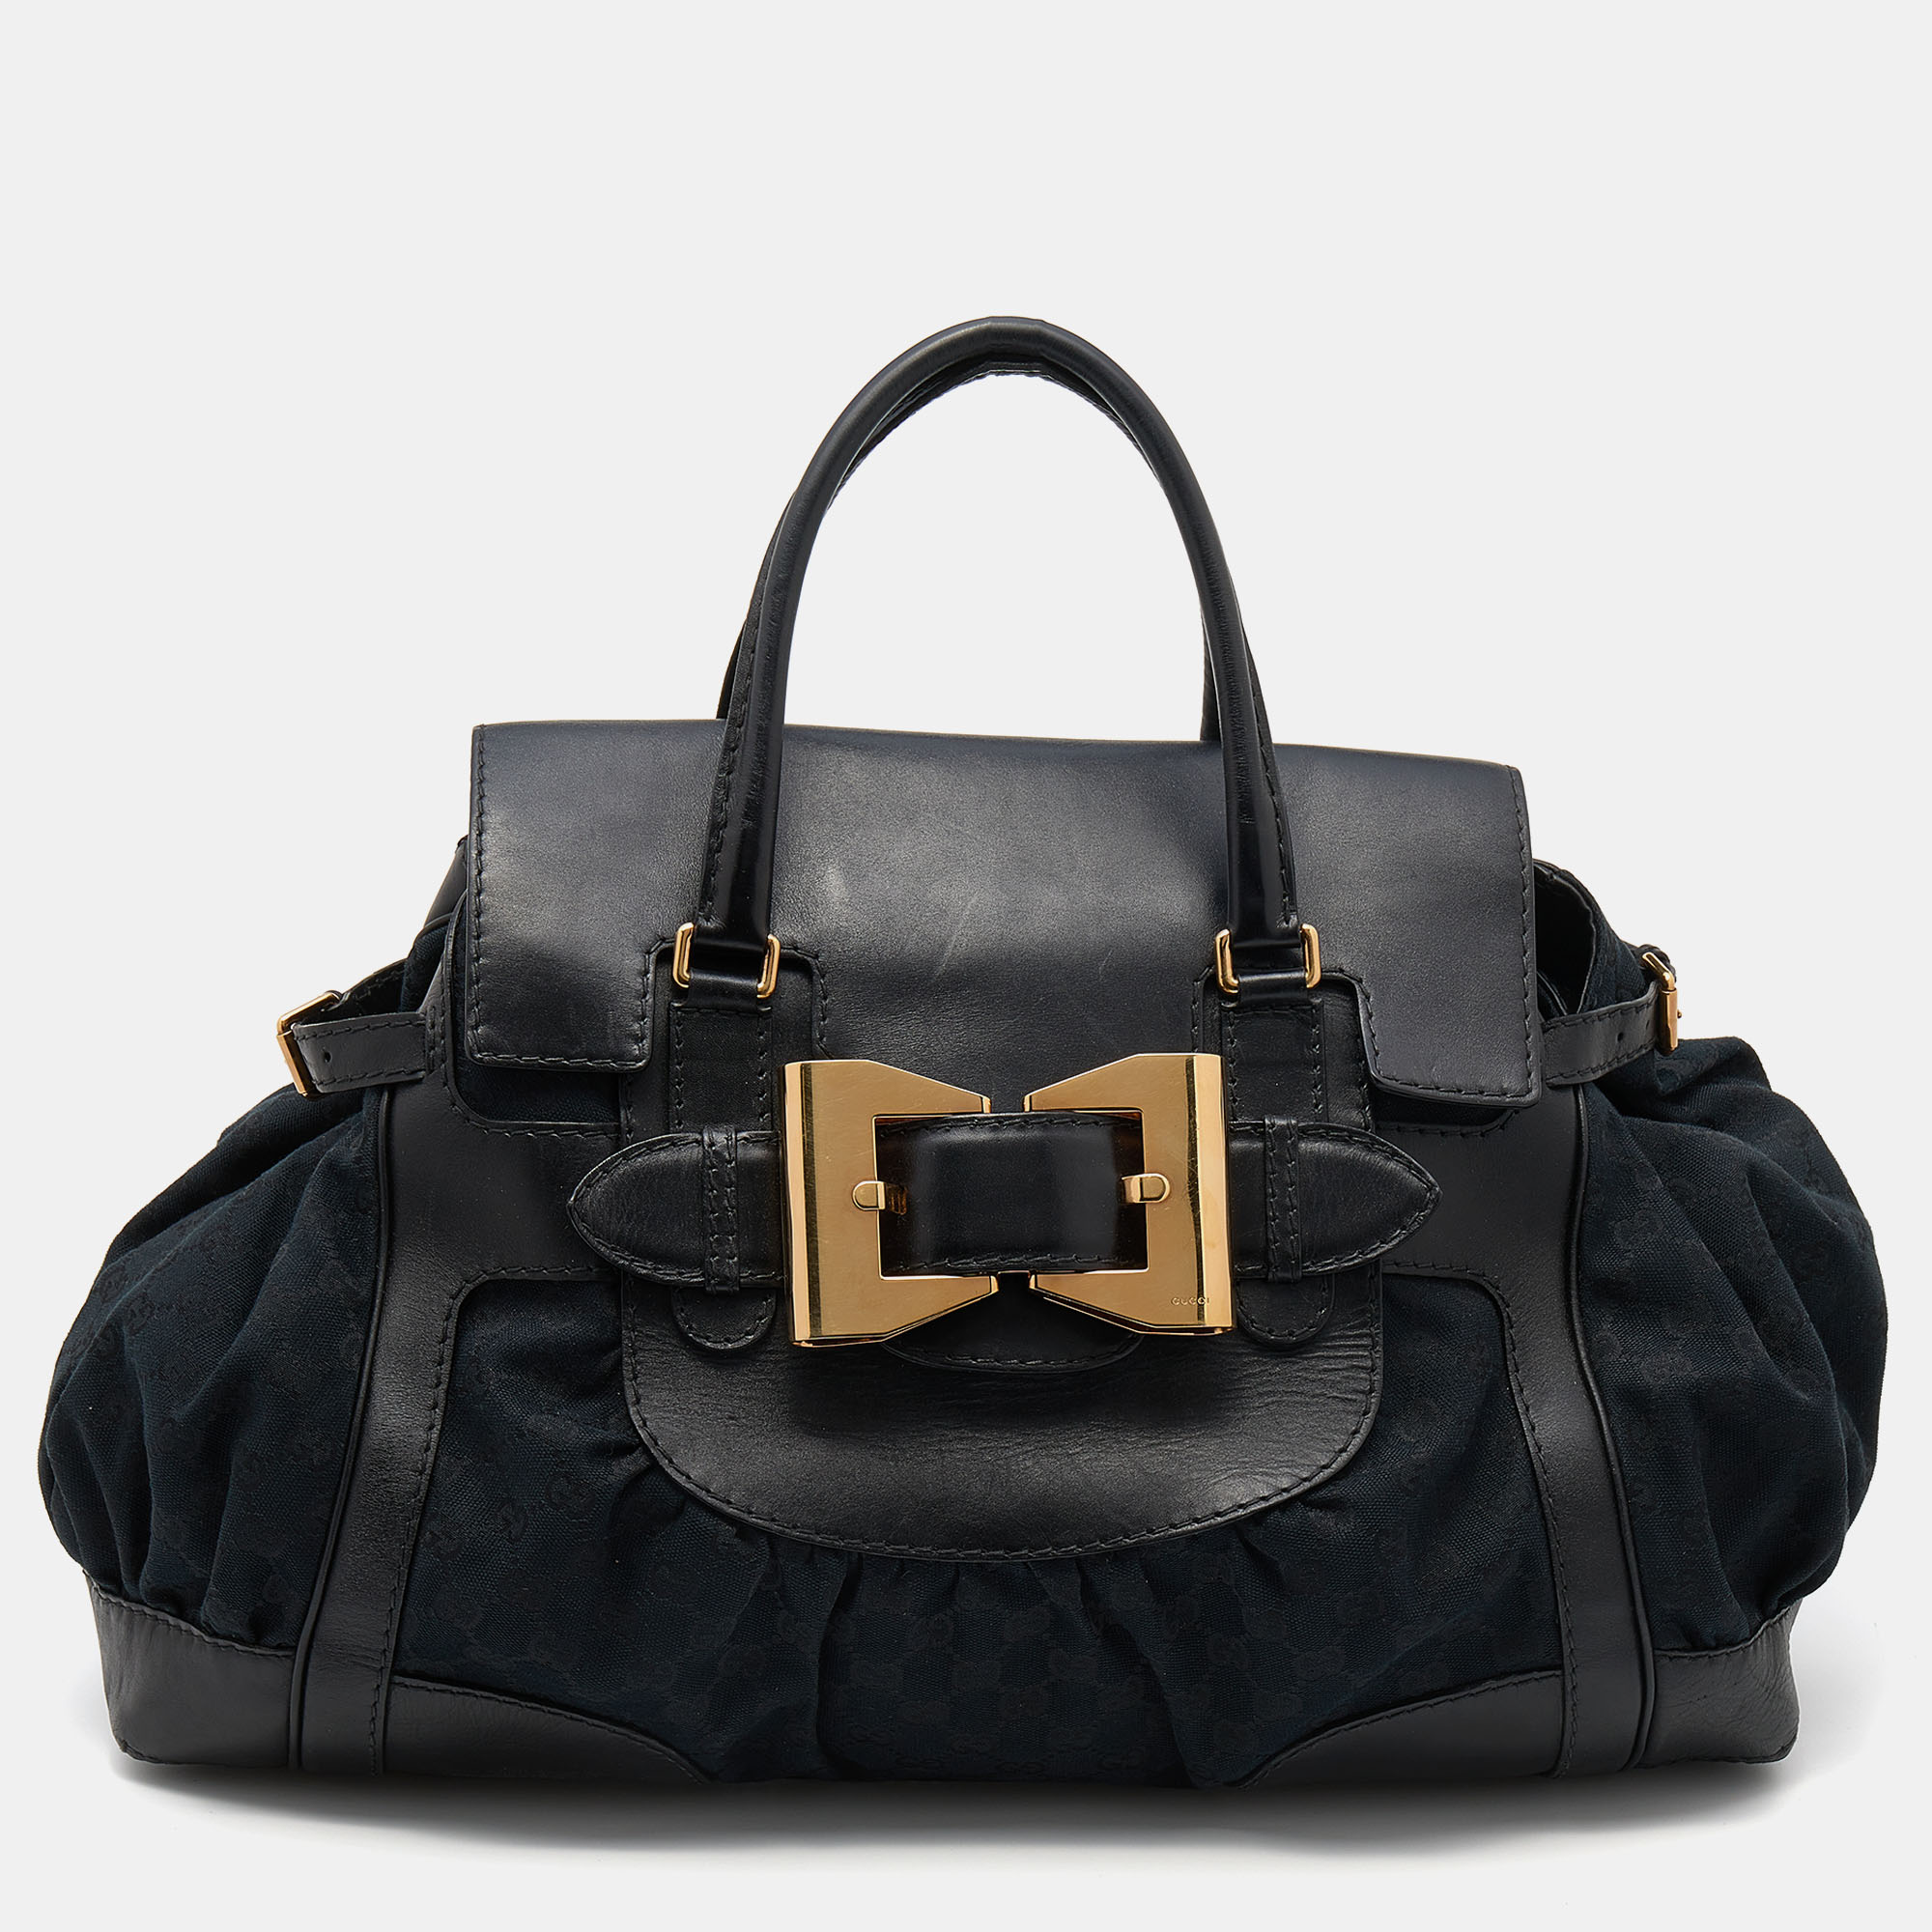 Gucci Black GG Canvas And Leather Large Queen Tote